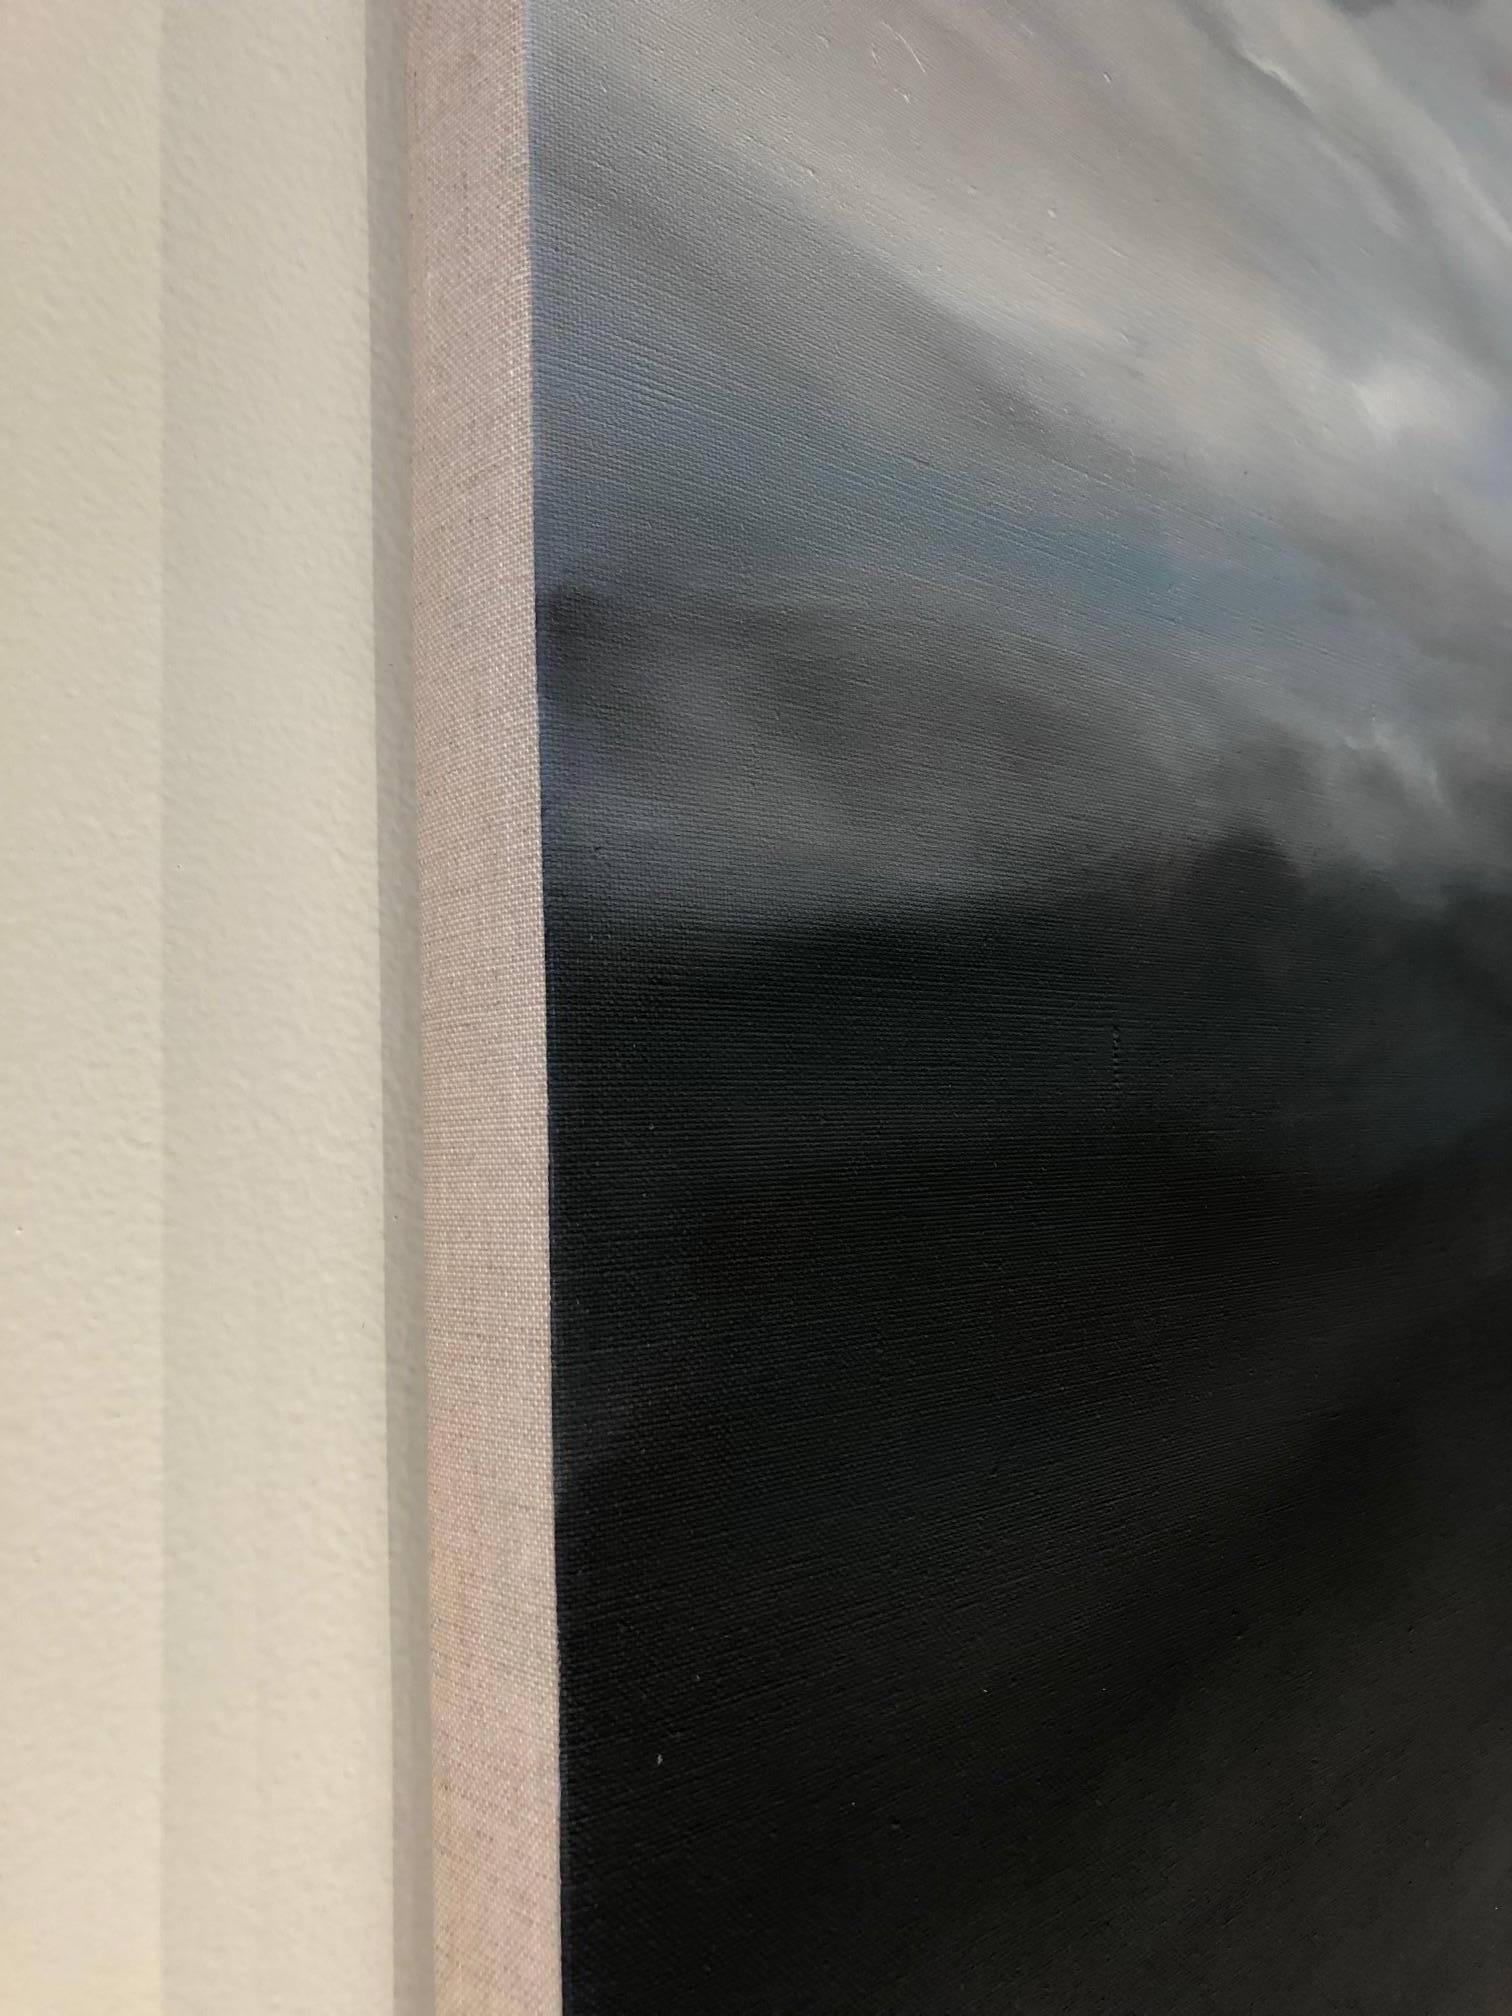 Drama at play in this sophisticated indigo grey land / ocean / sky-scape painting, featuring a stormy blue sky in the distance. Rich jewel like color over natural raw Belgian linen. Thin layers of oil paint create the shimmering and provocative work